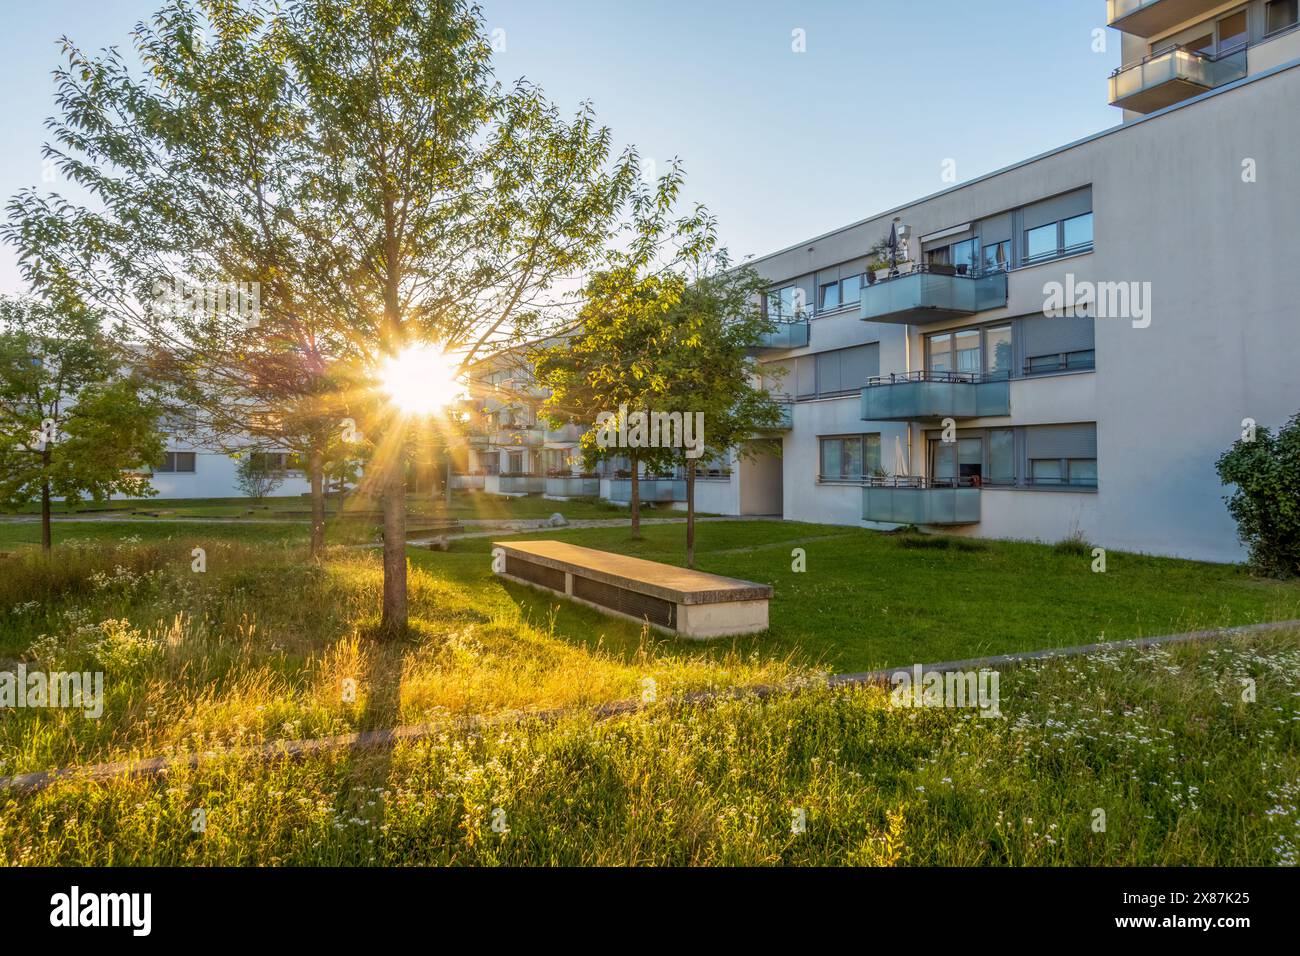 Modern residential building with balconies near green trees and plants in Munich city Stock Photo